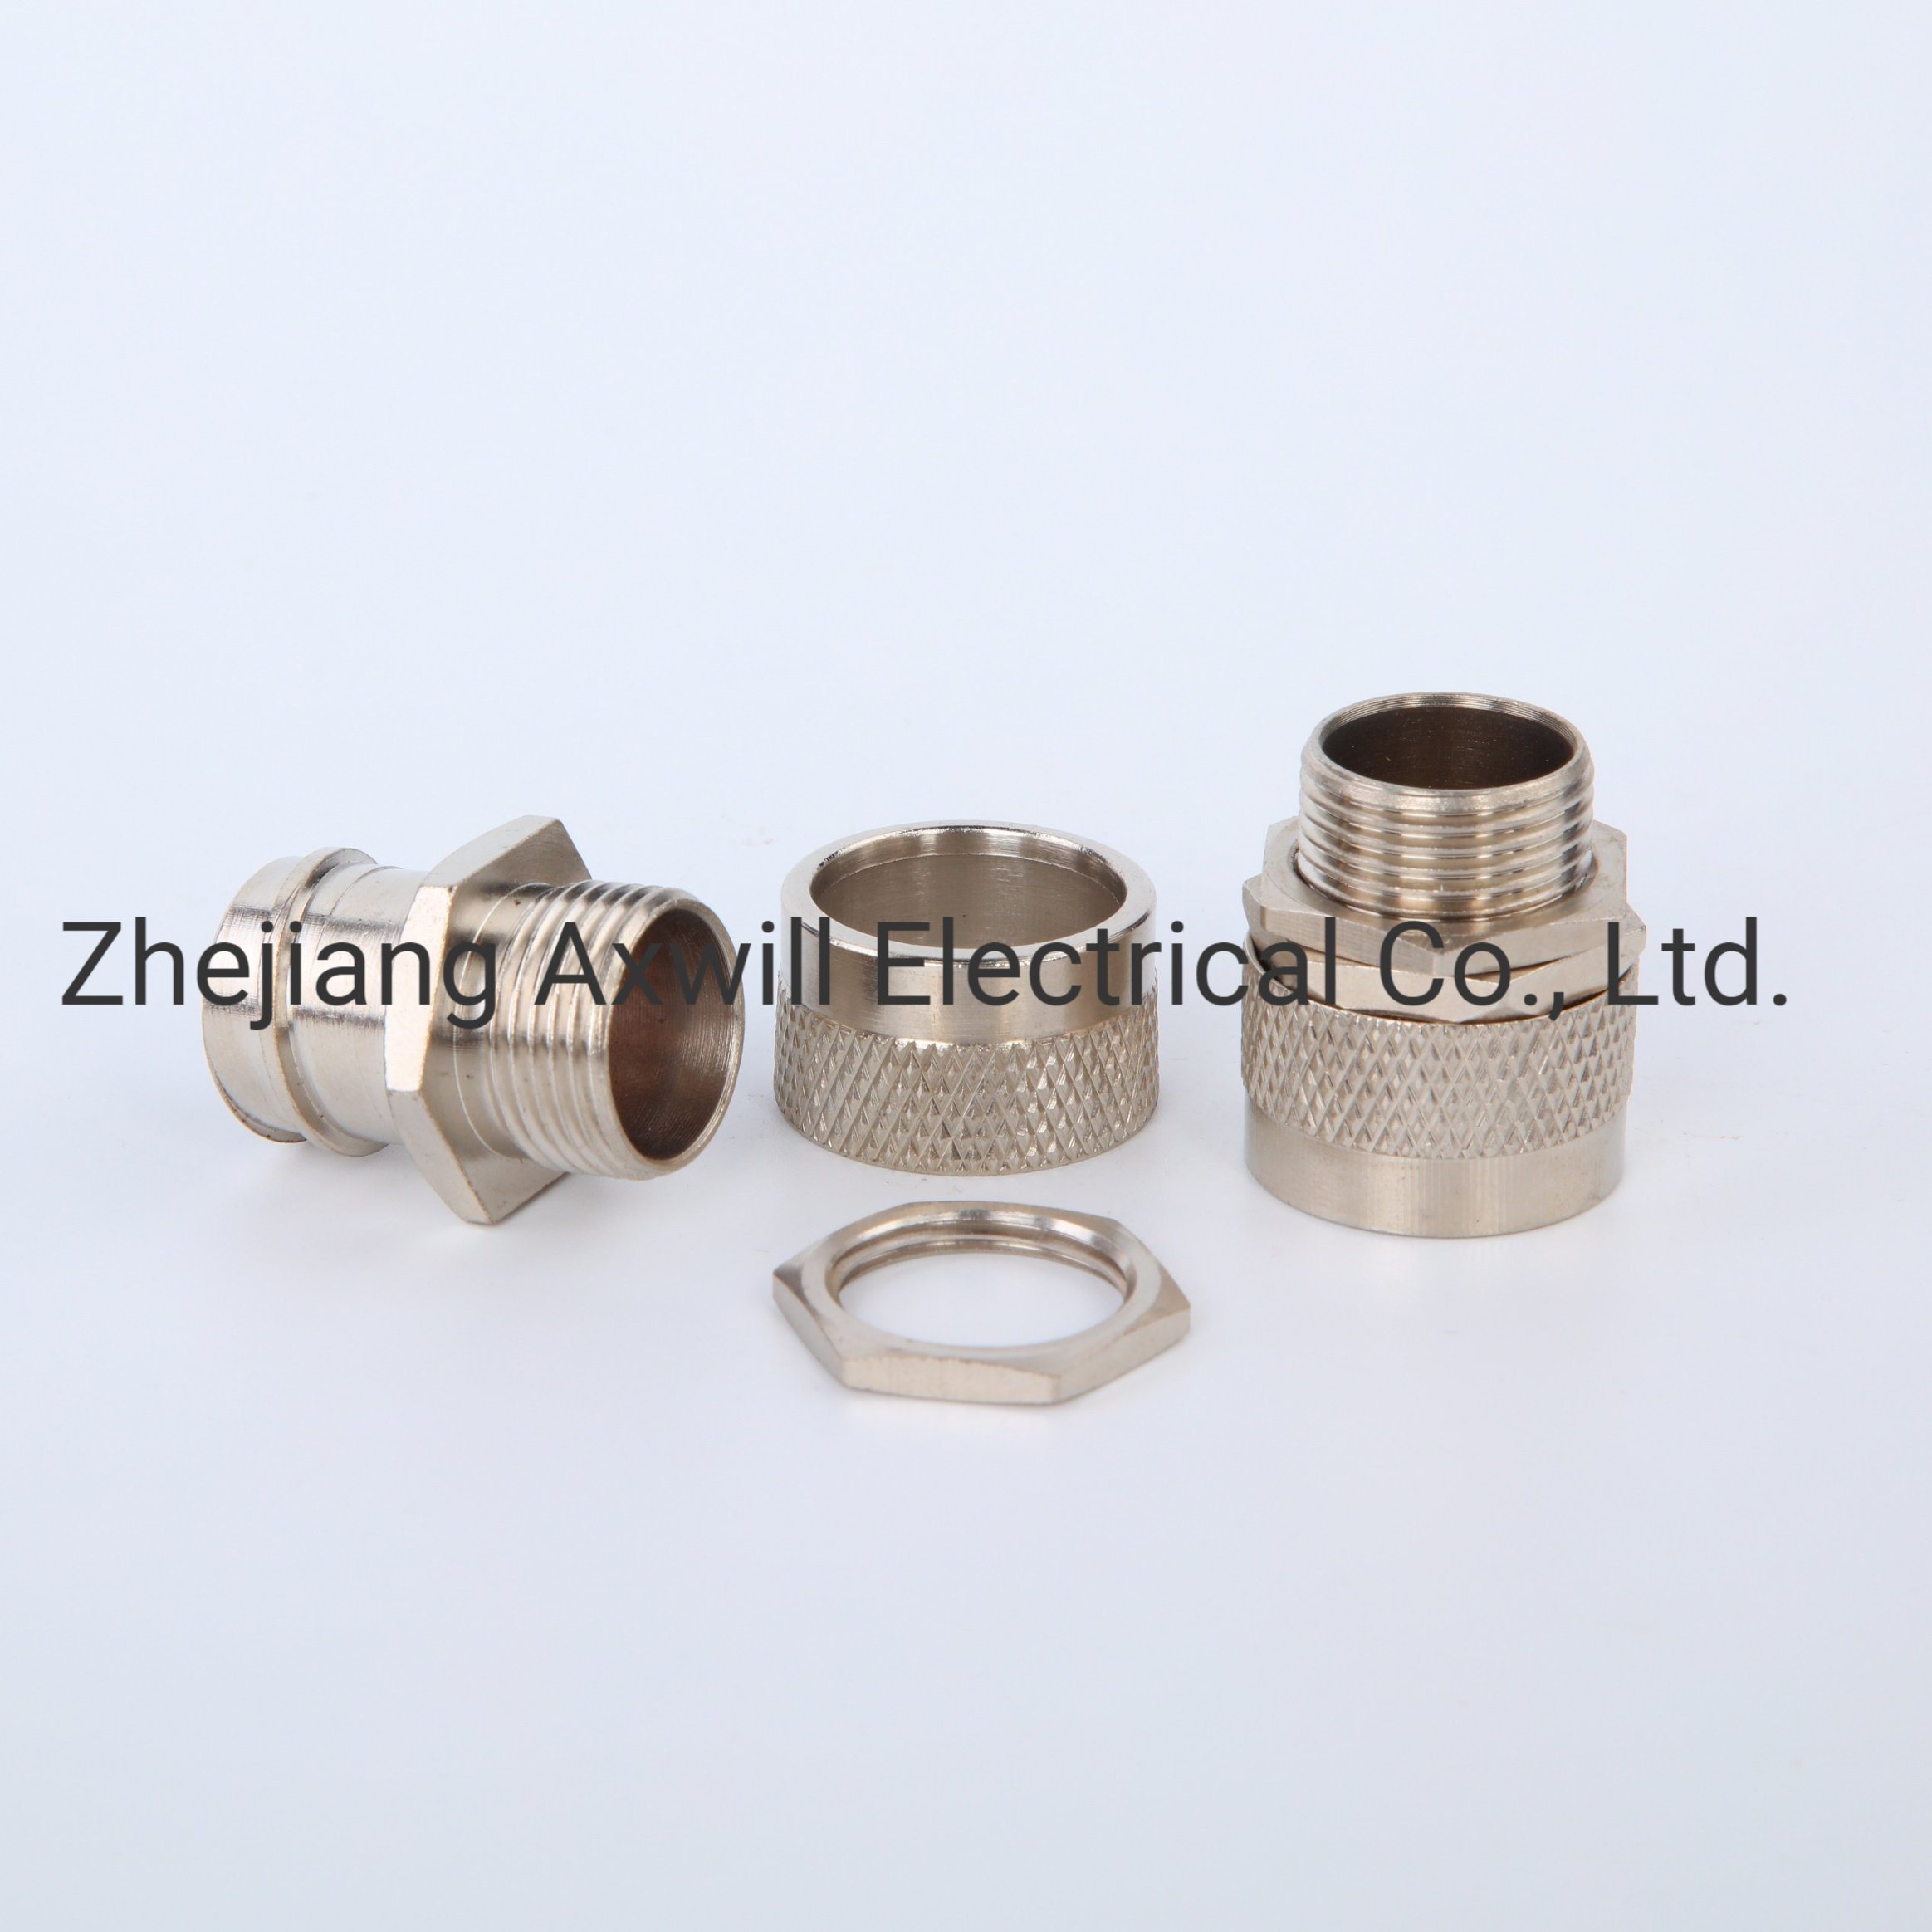 Nickle Plated Brass Adaptor for Flexible Conduit Hose 32mm